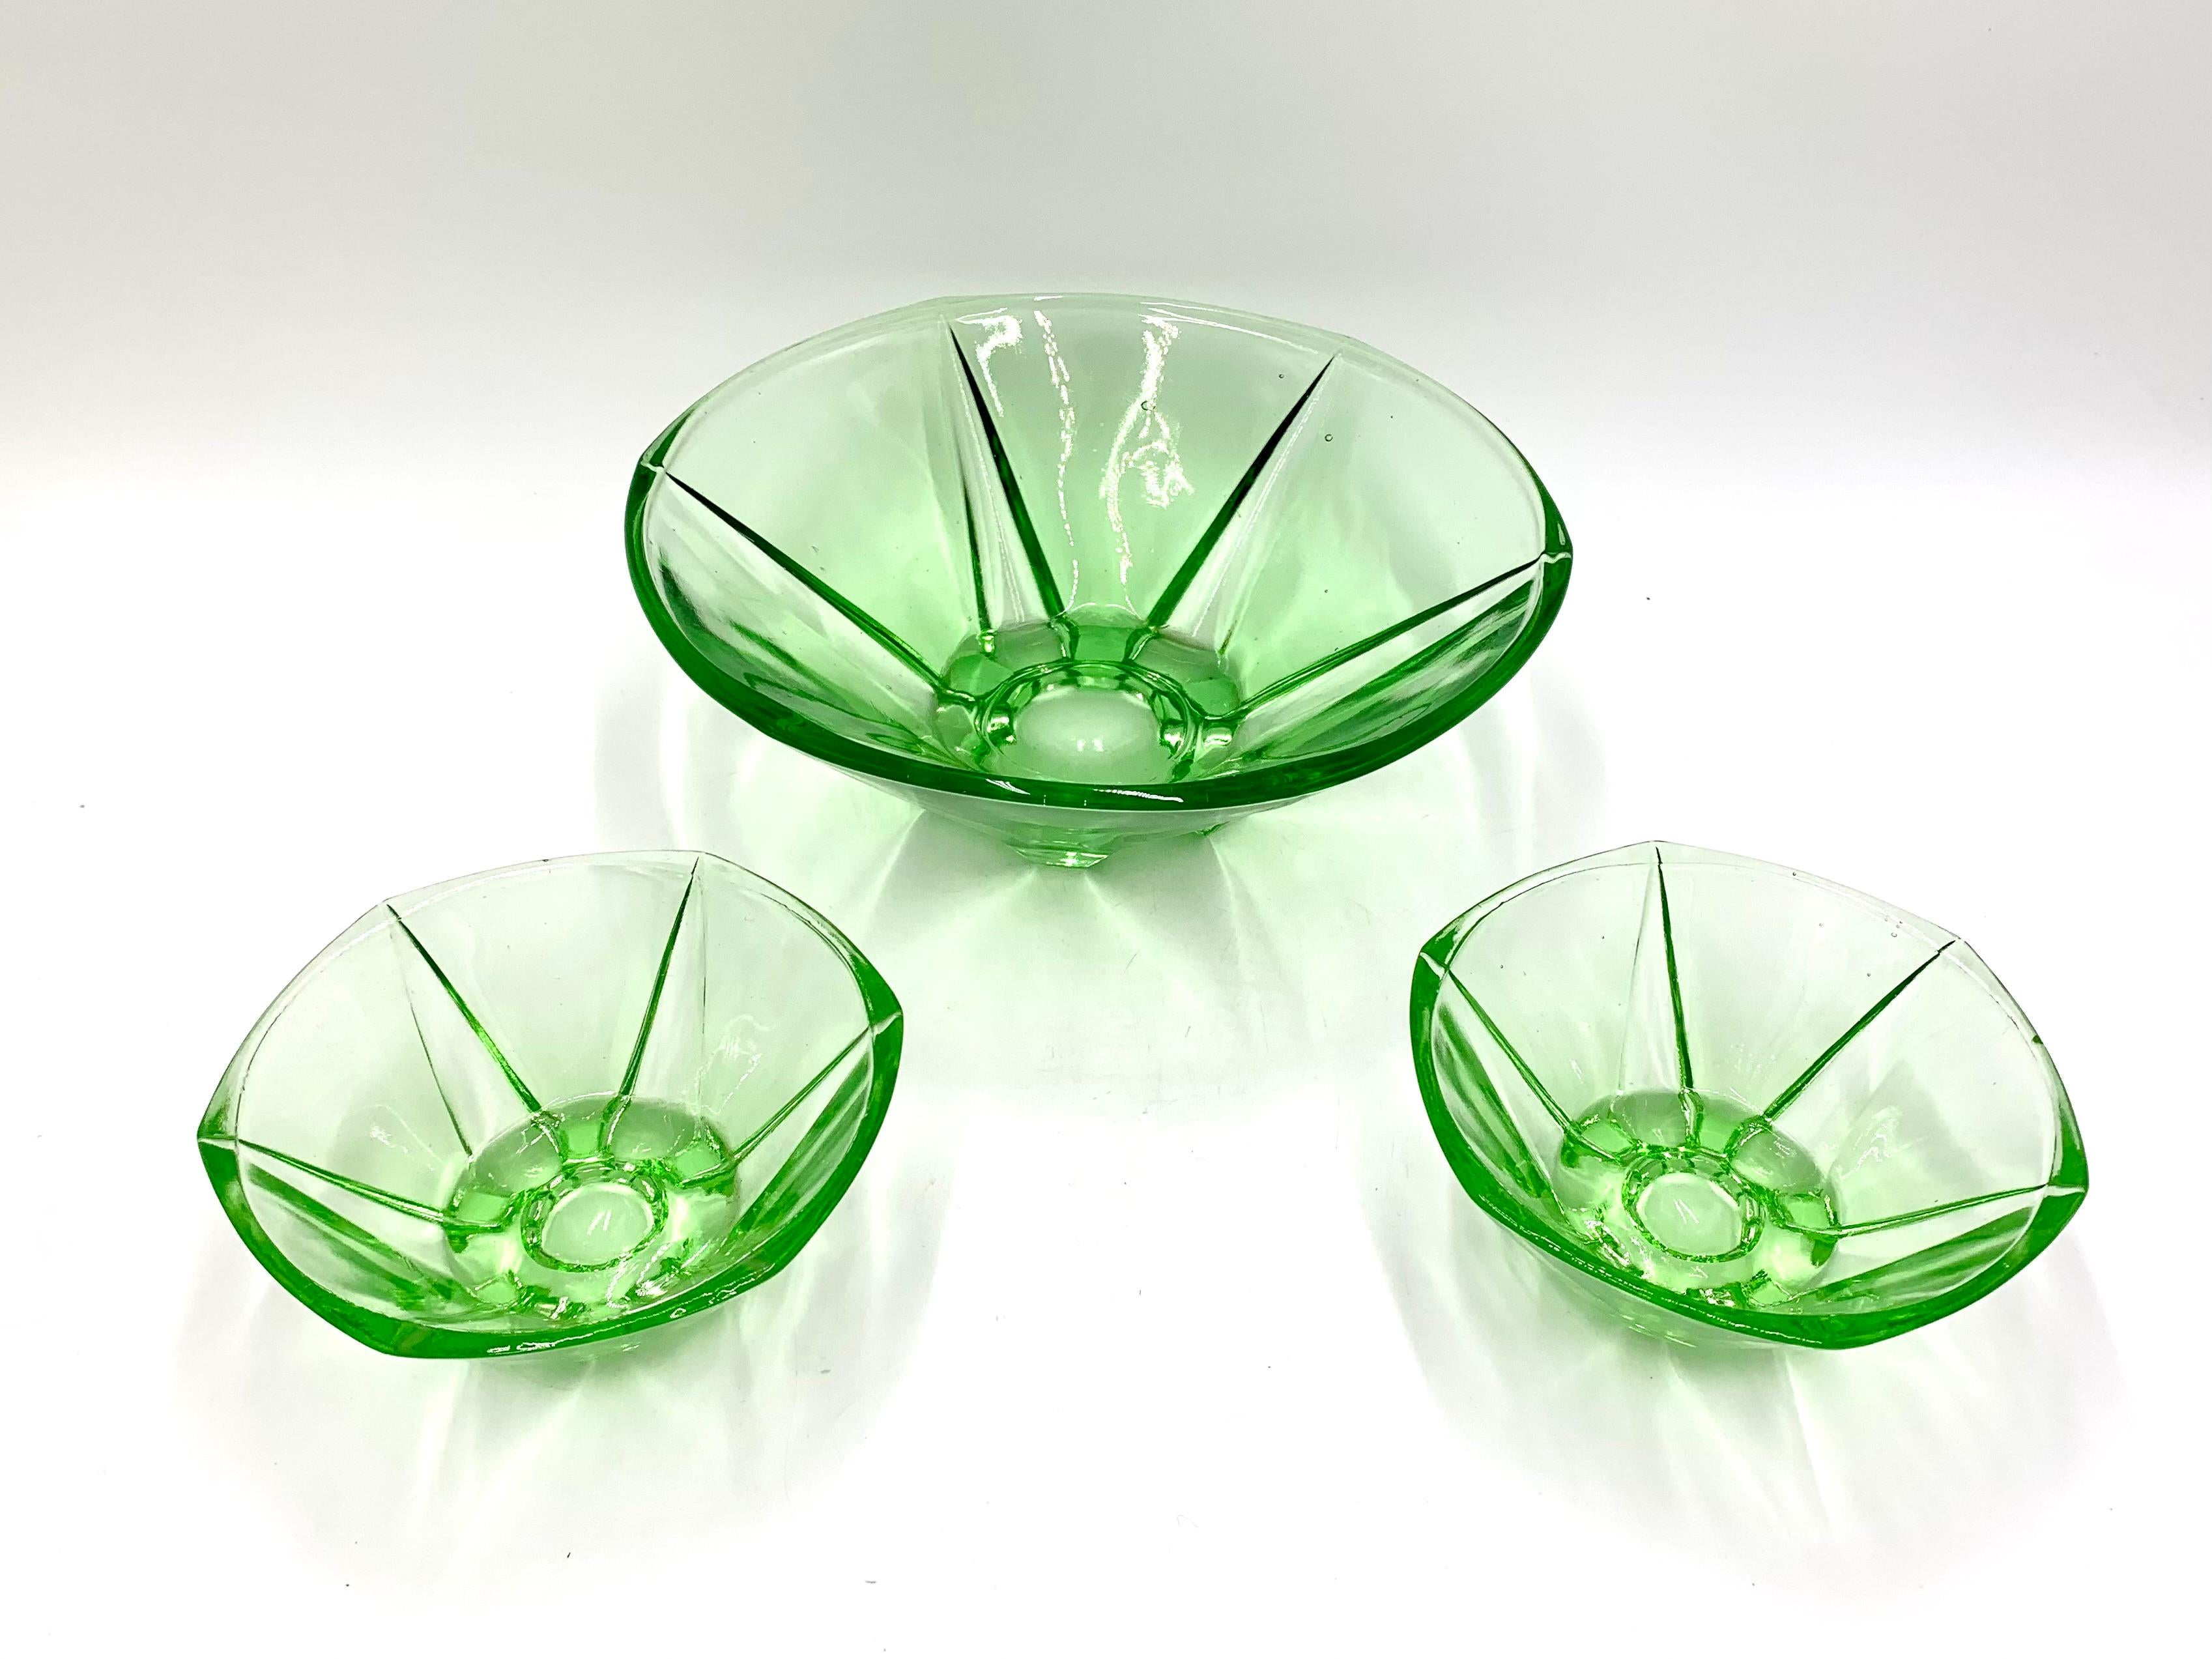 Set of three vintage green glass bowls (one bigger and two smaller)

Made in Poland in the 1960s

Very good condition

Measures: Larger: Height 8cm, diameter 22cm

Smaller: Height 6cm, diameter 12cm.